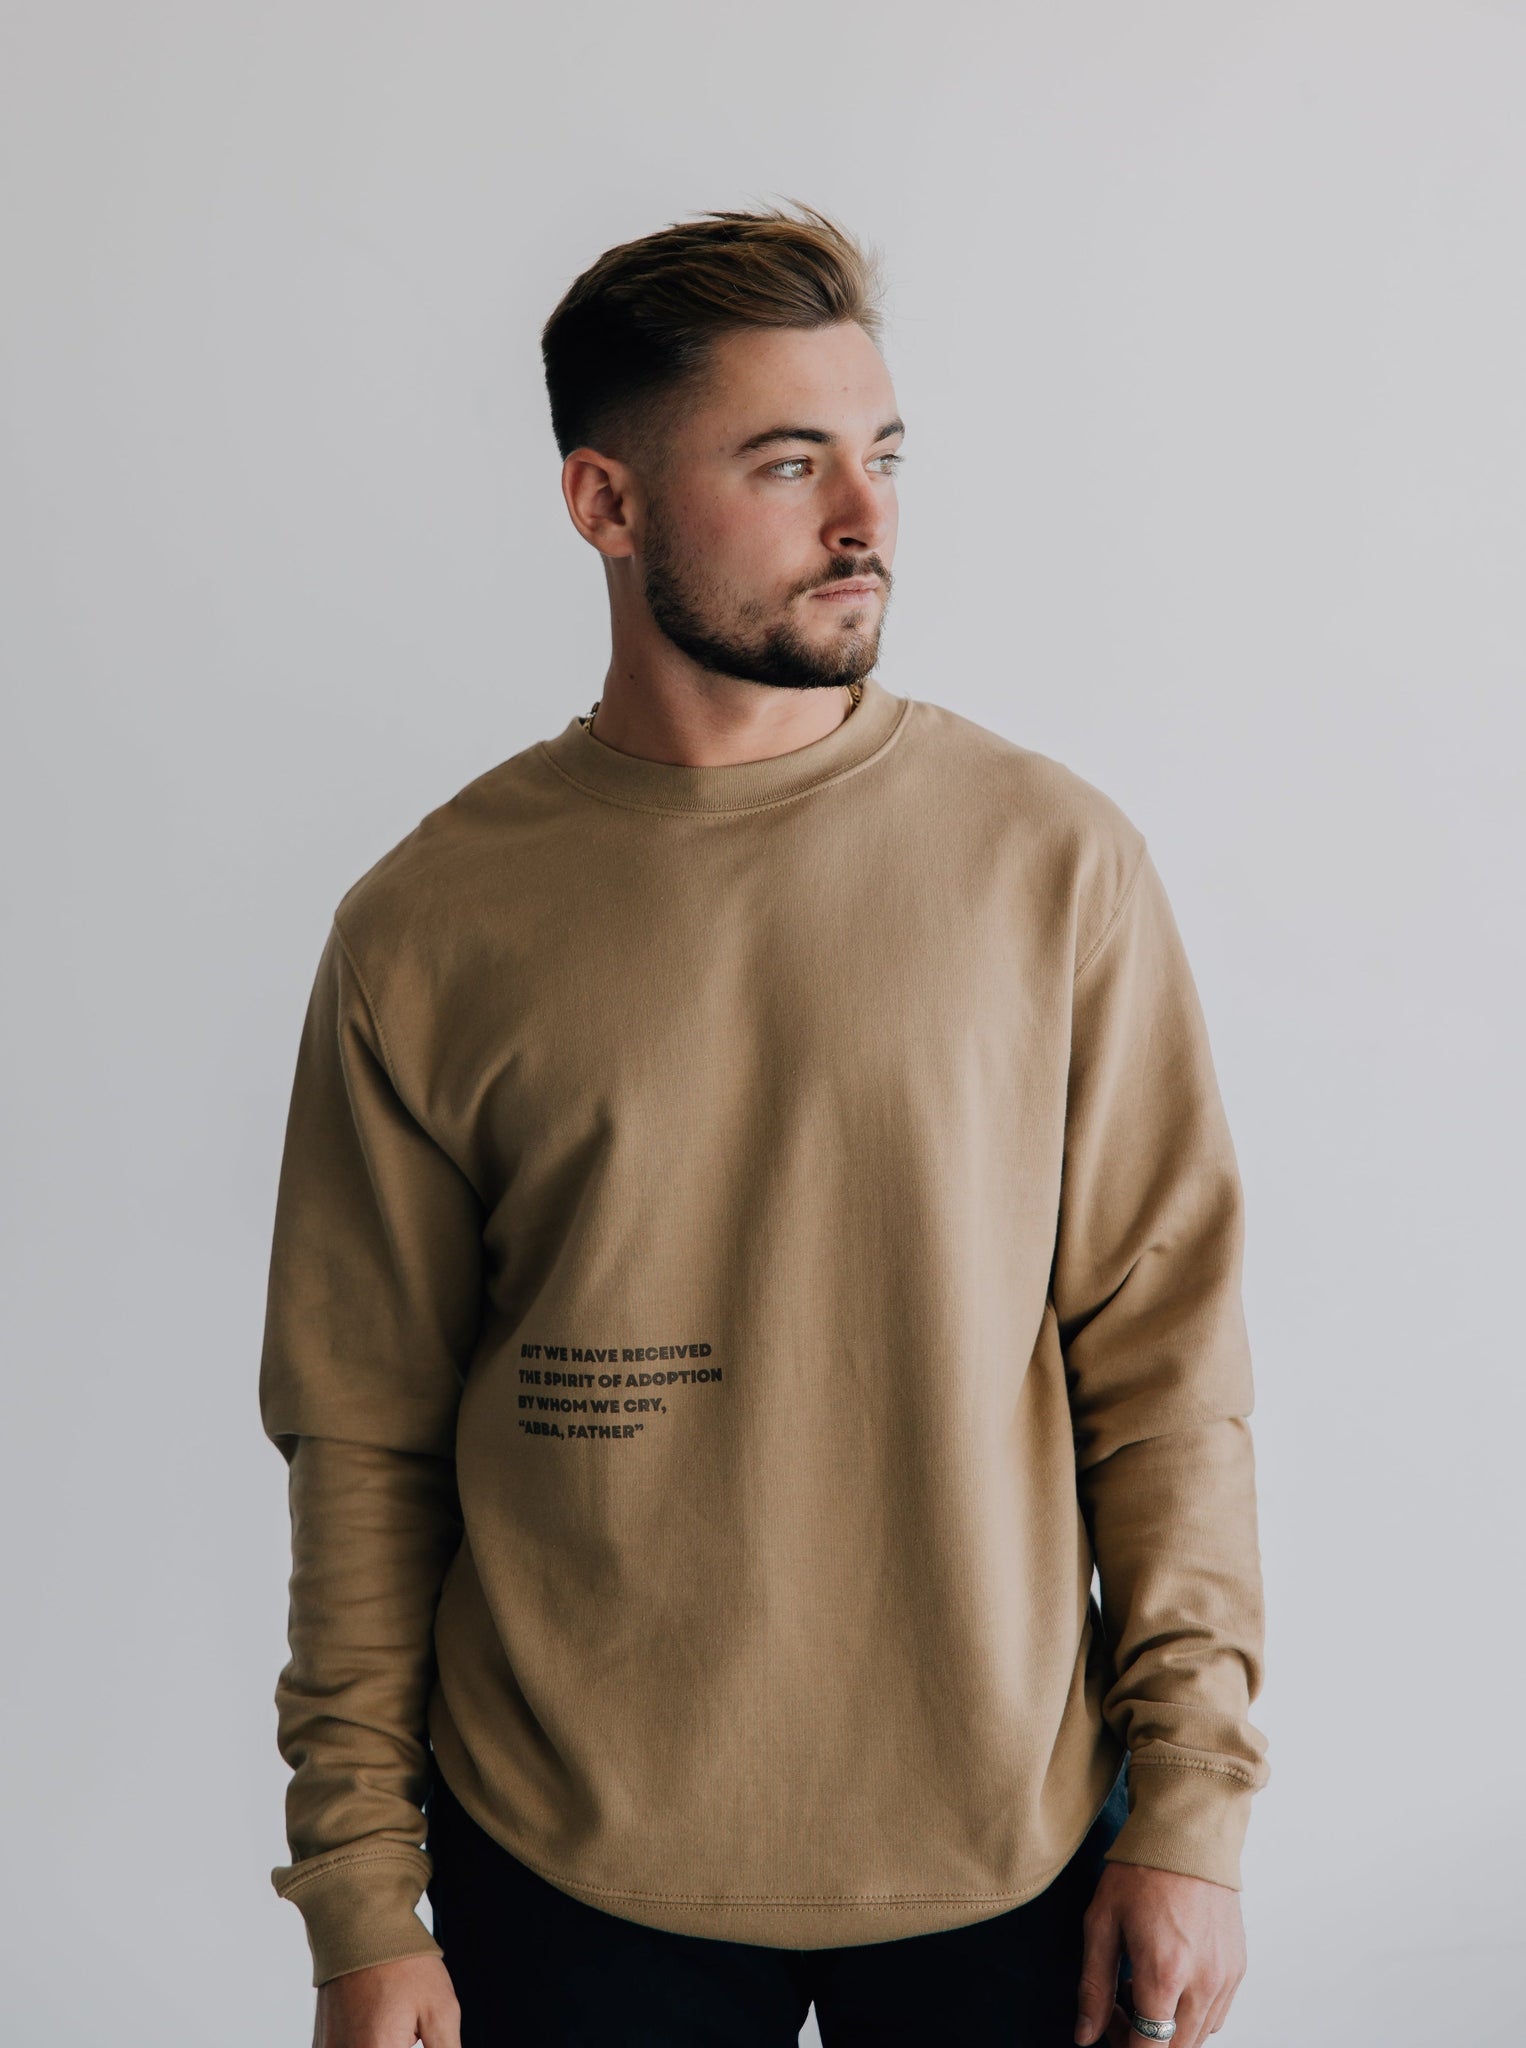 Neutral Christian Clothing Apparel Crewneck Outfit